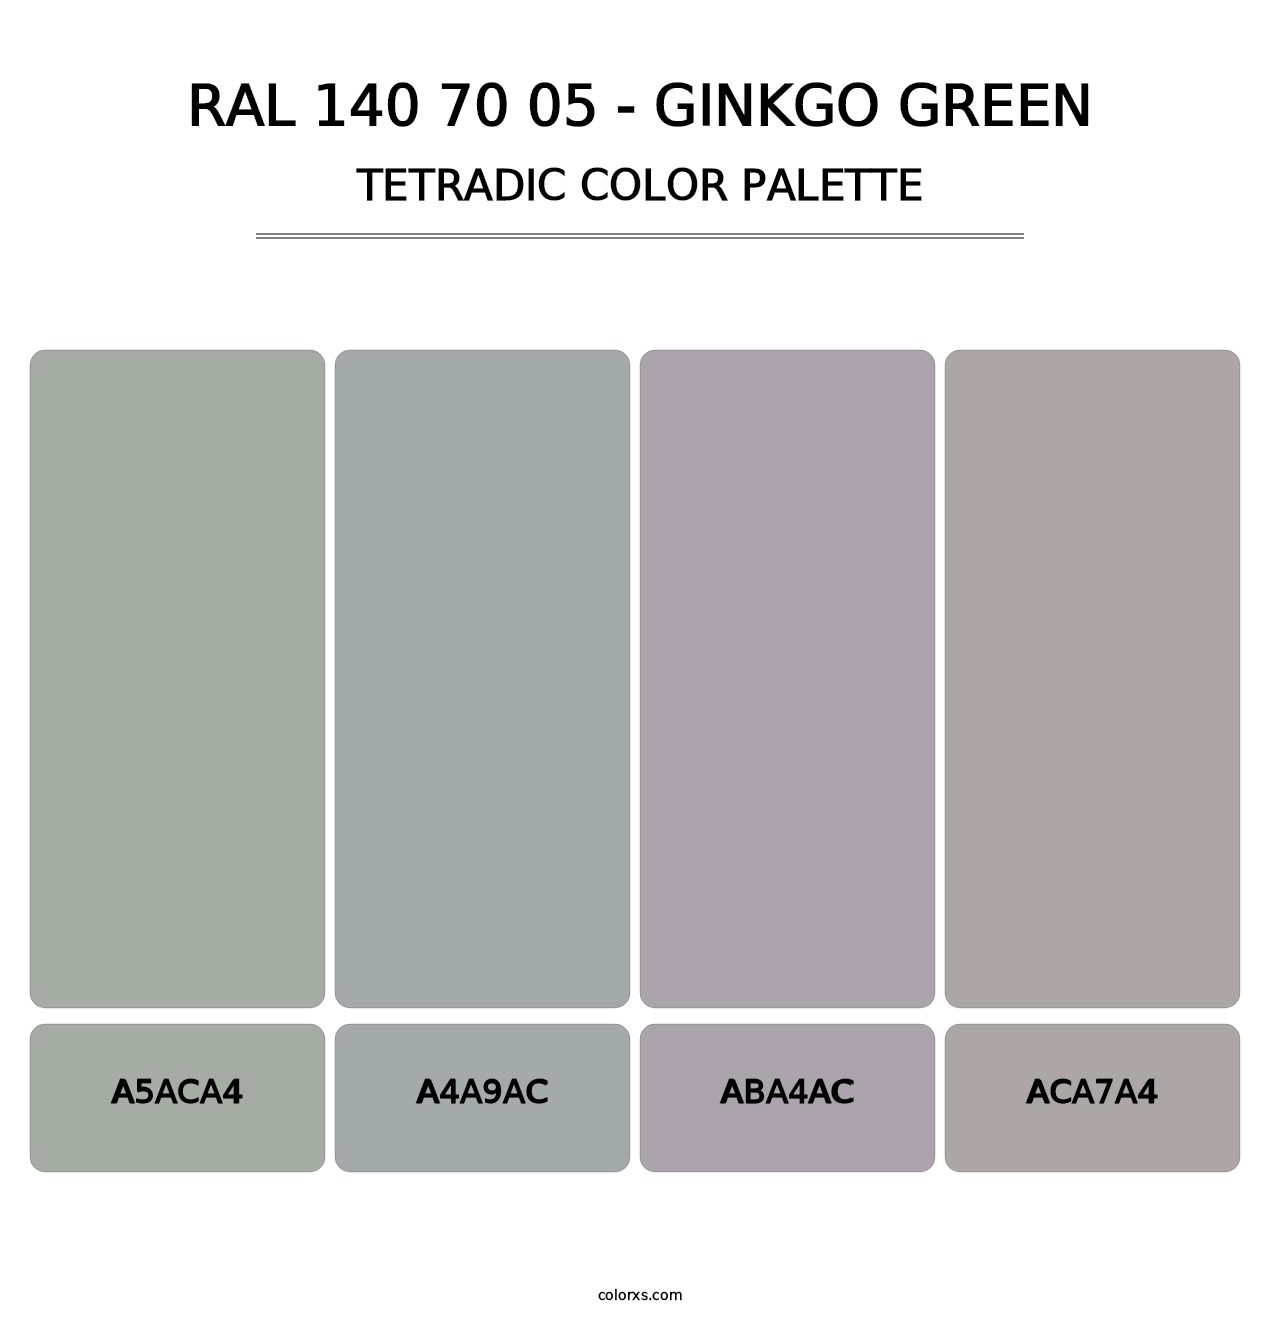 RAL 140 70 05 - Ginkgo Green - Tetradic Color Palette